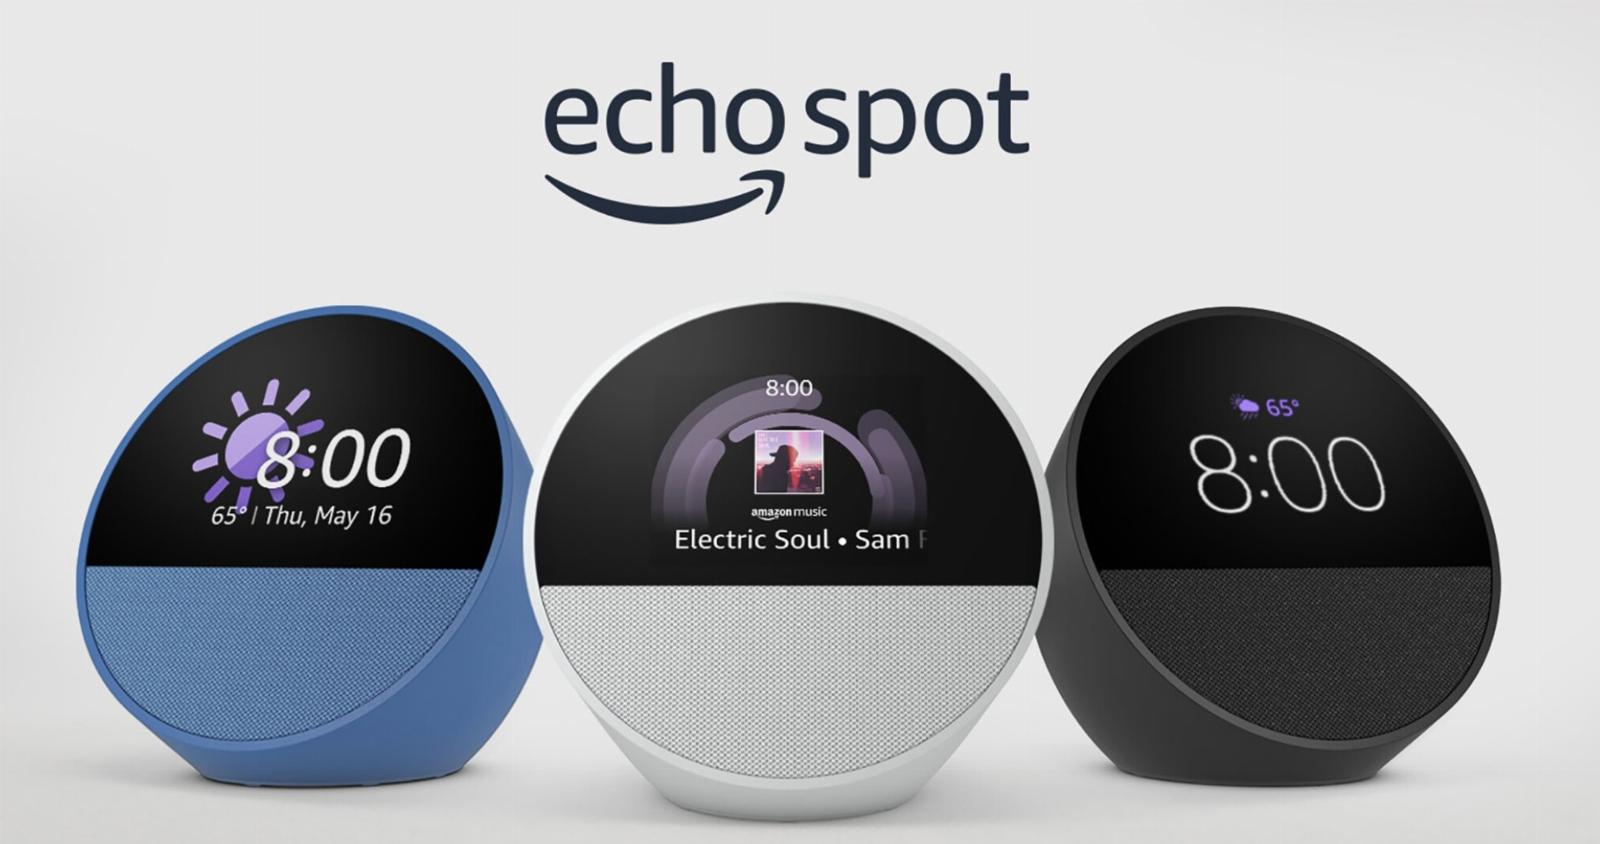 Amazon revives its Echo Spot with an upgraded look and improved audio